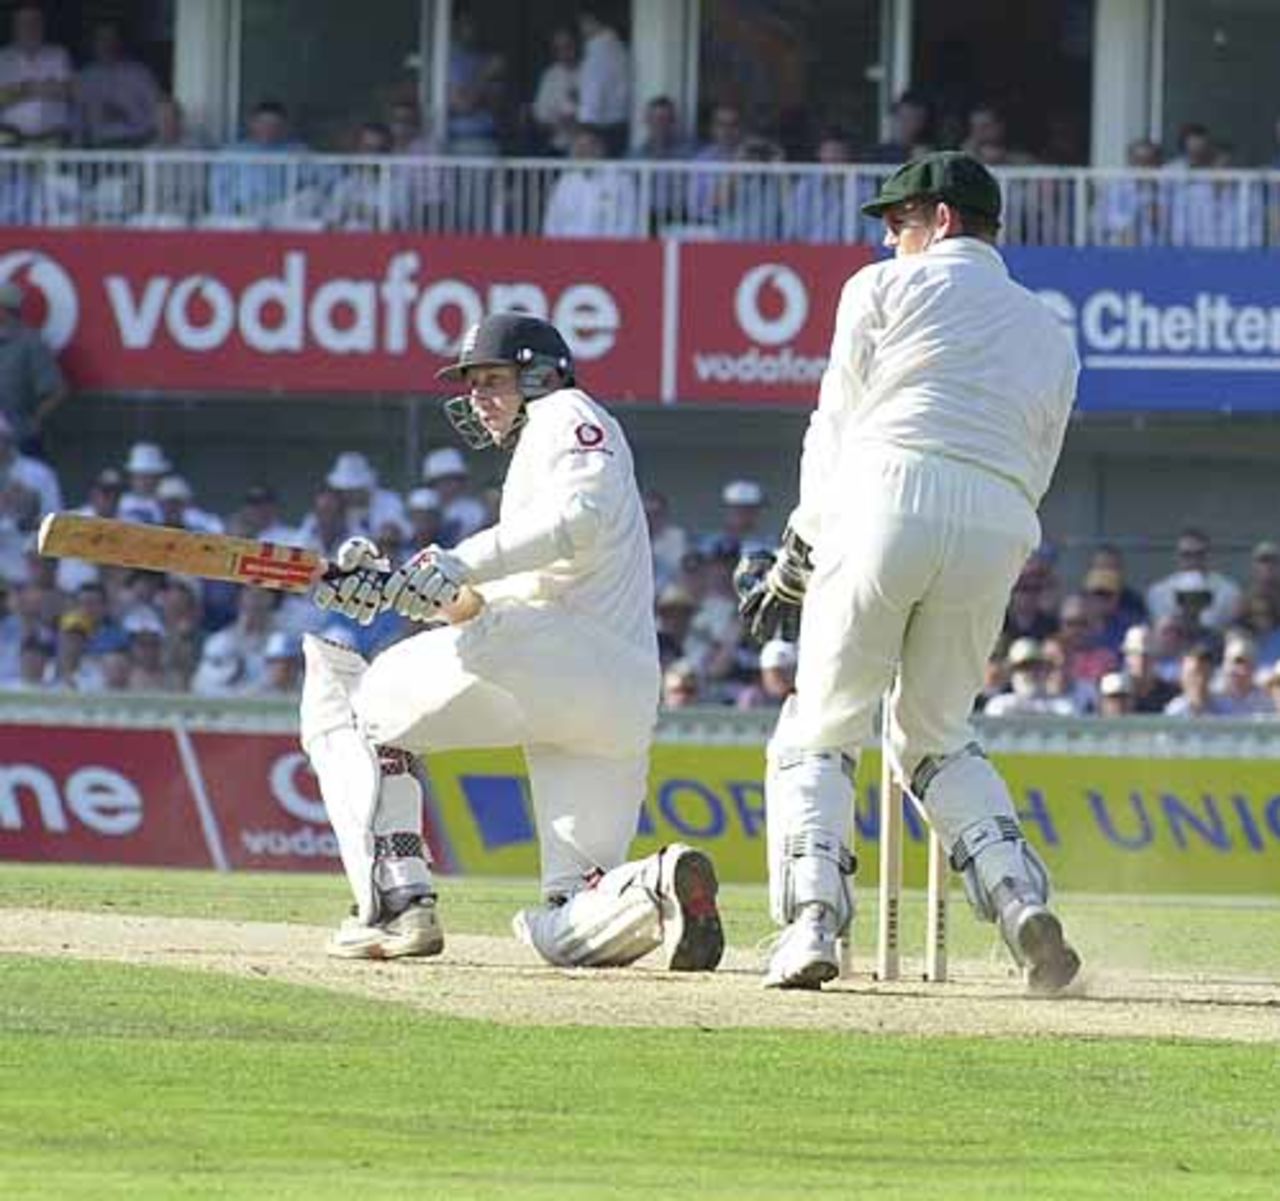 Mike Atherton sweeps Warne for four in his innings of 13, Fifth npower Test, The Oval, Fri 24 Aug 2001